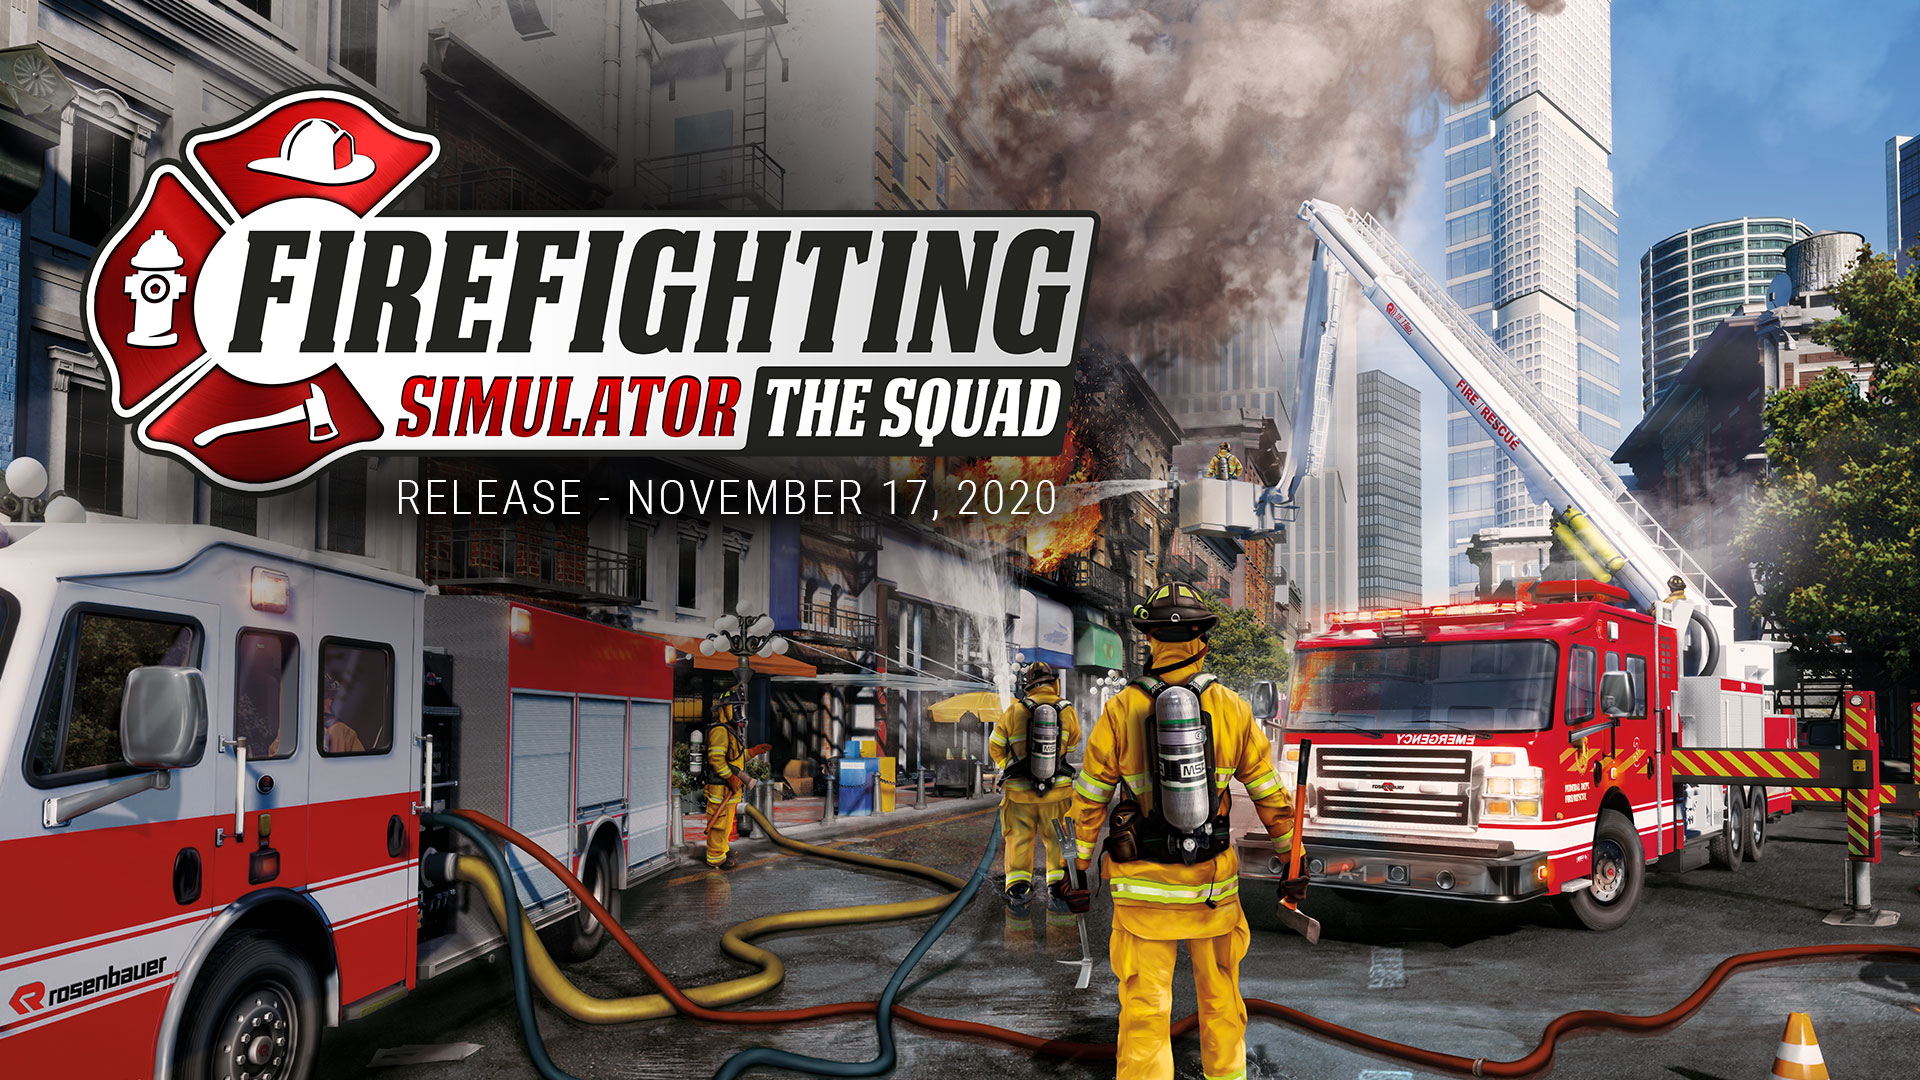 Firefighting Simulator The Squad will be released on